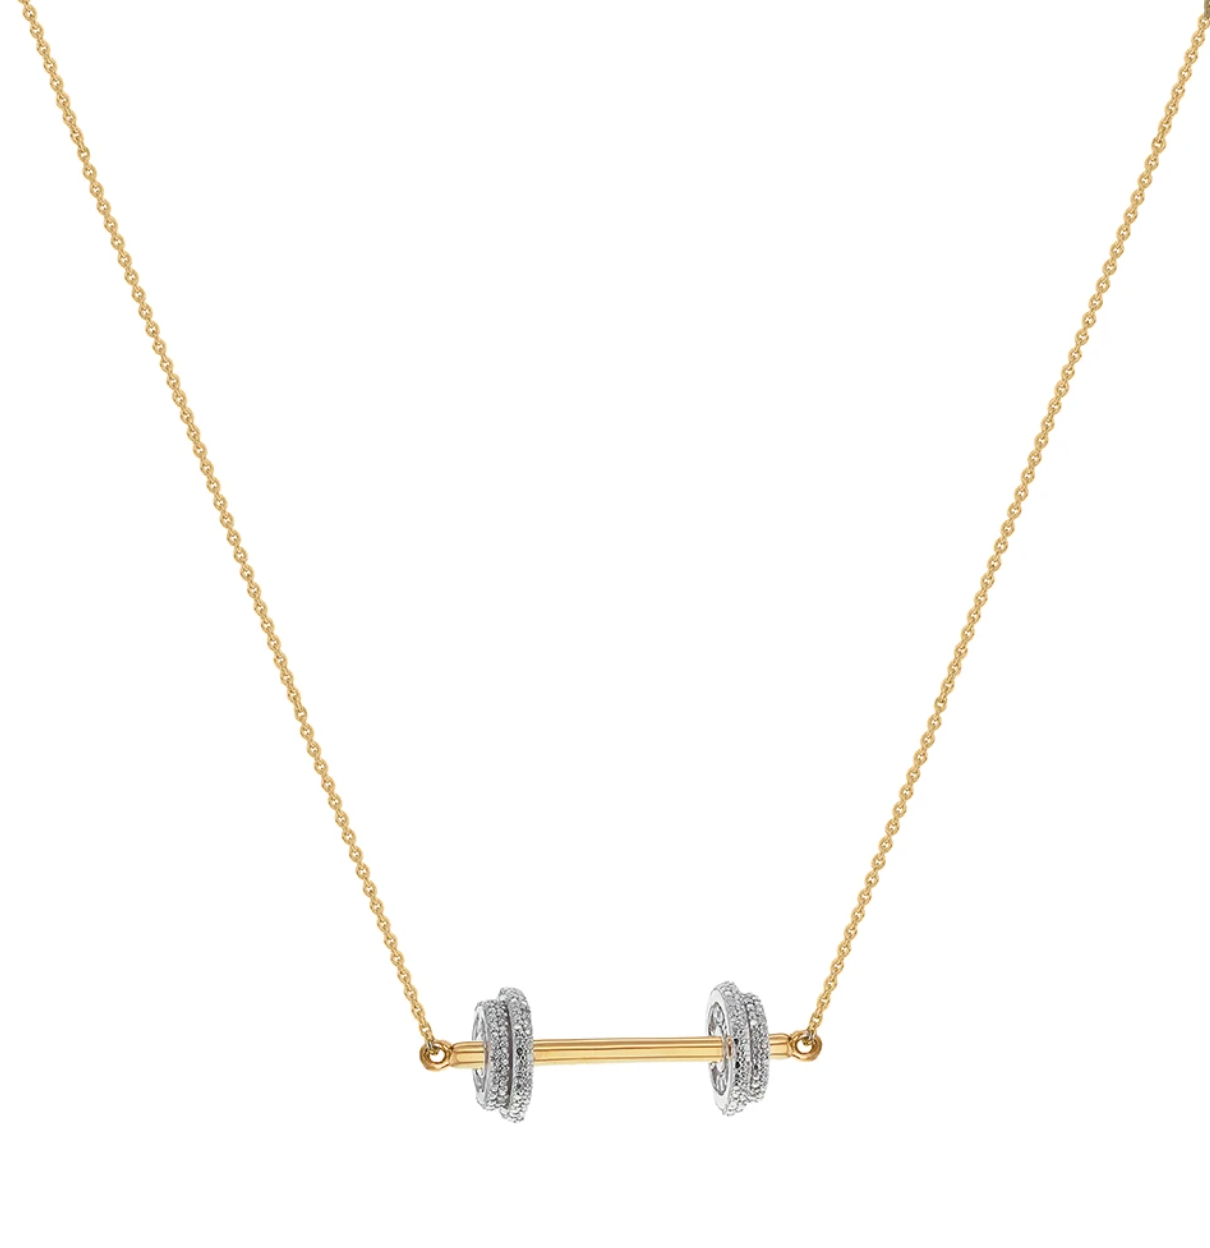 Joan Hornig Perfect Graduation Gift 18k Gold Dumbell Necklace with White Diamonds 